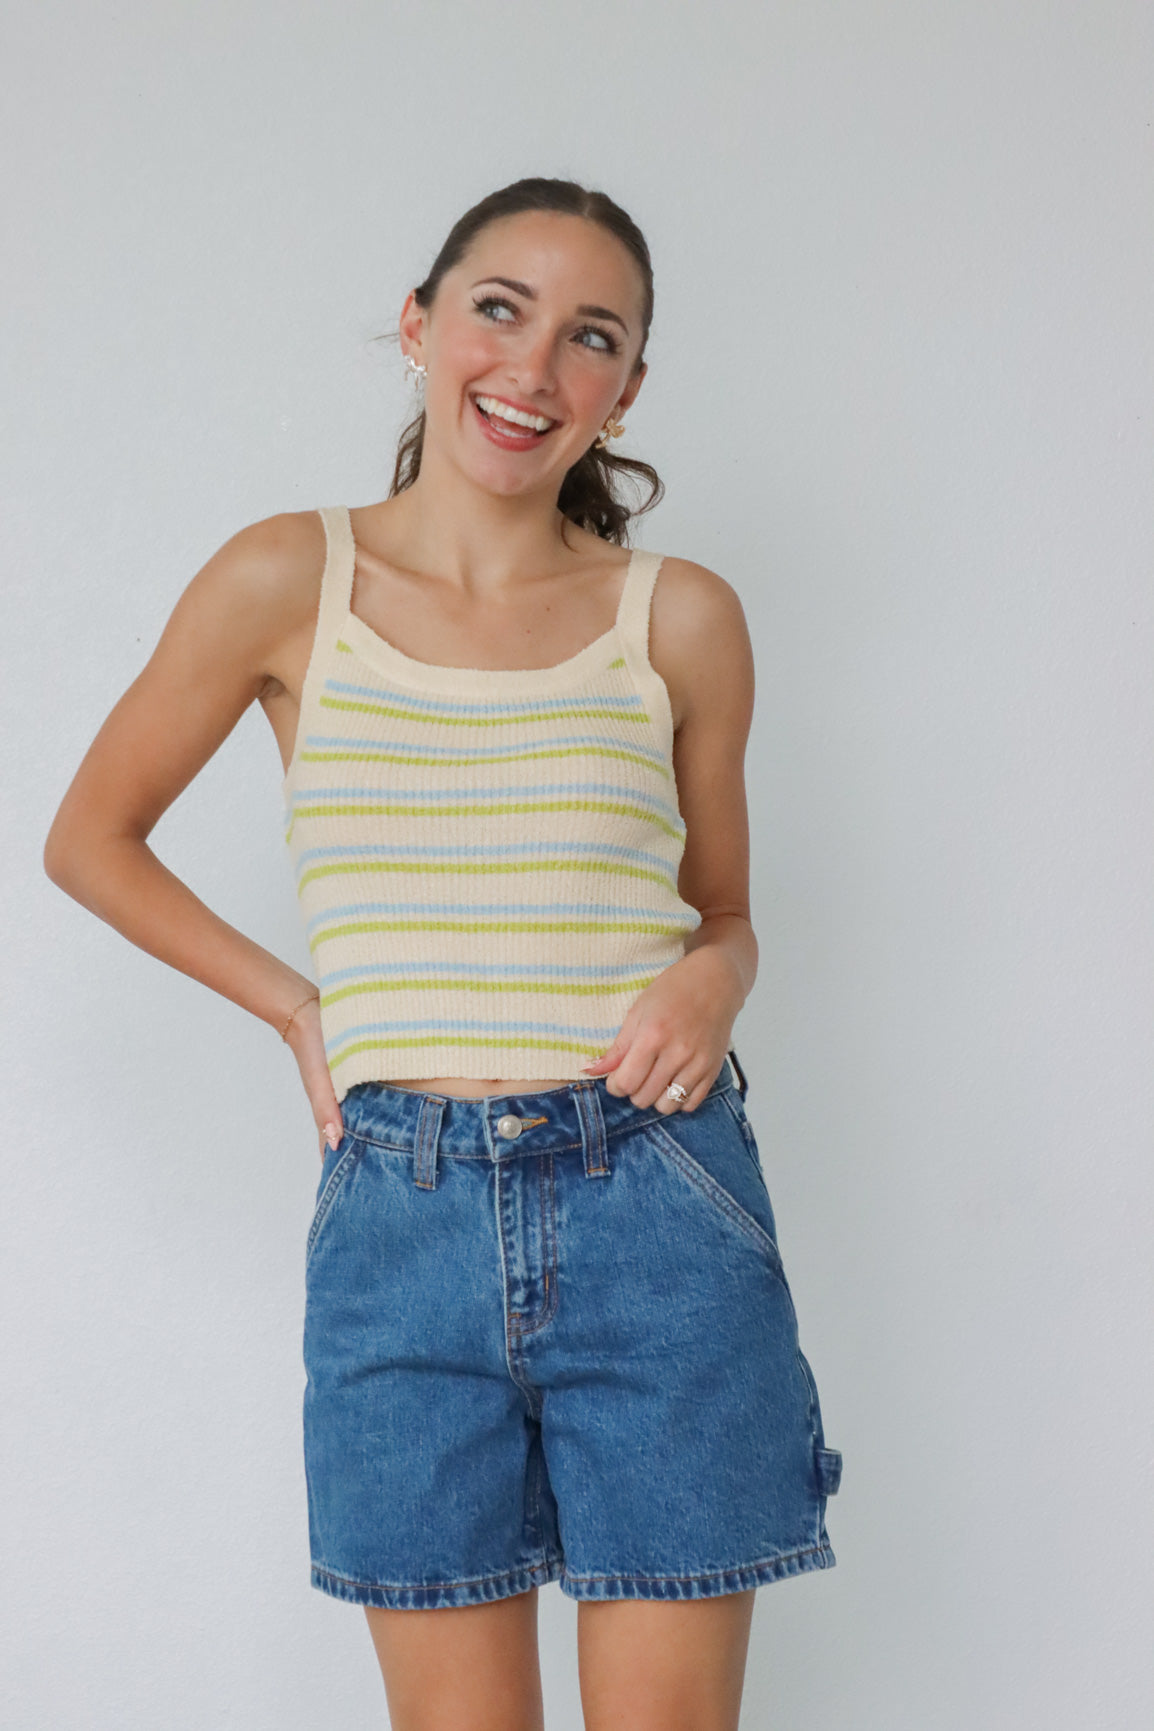 girl wearing yellow, blue, and green striped tank top